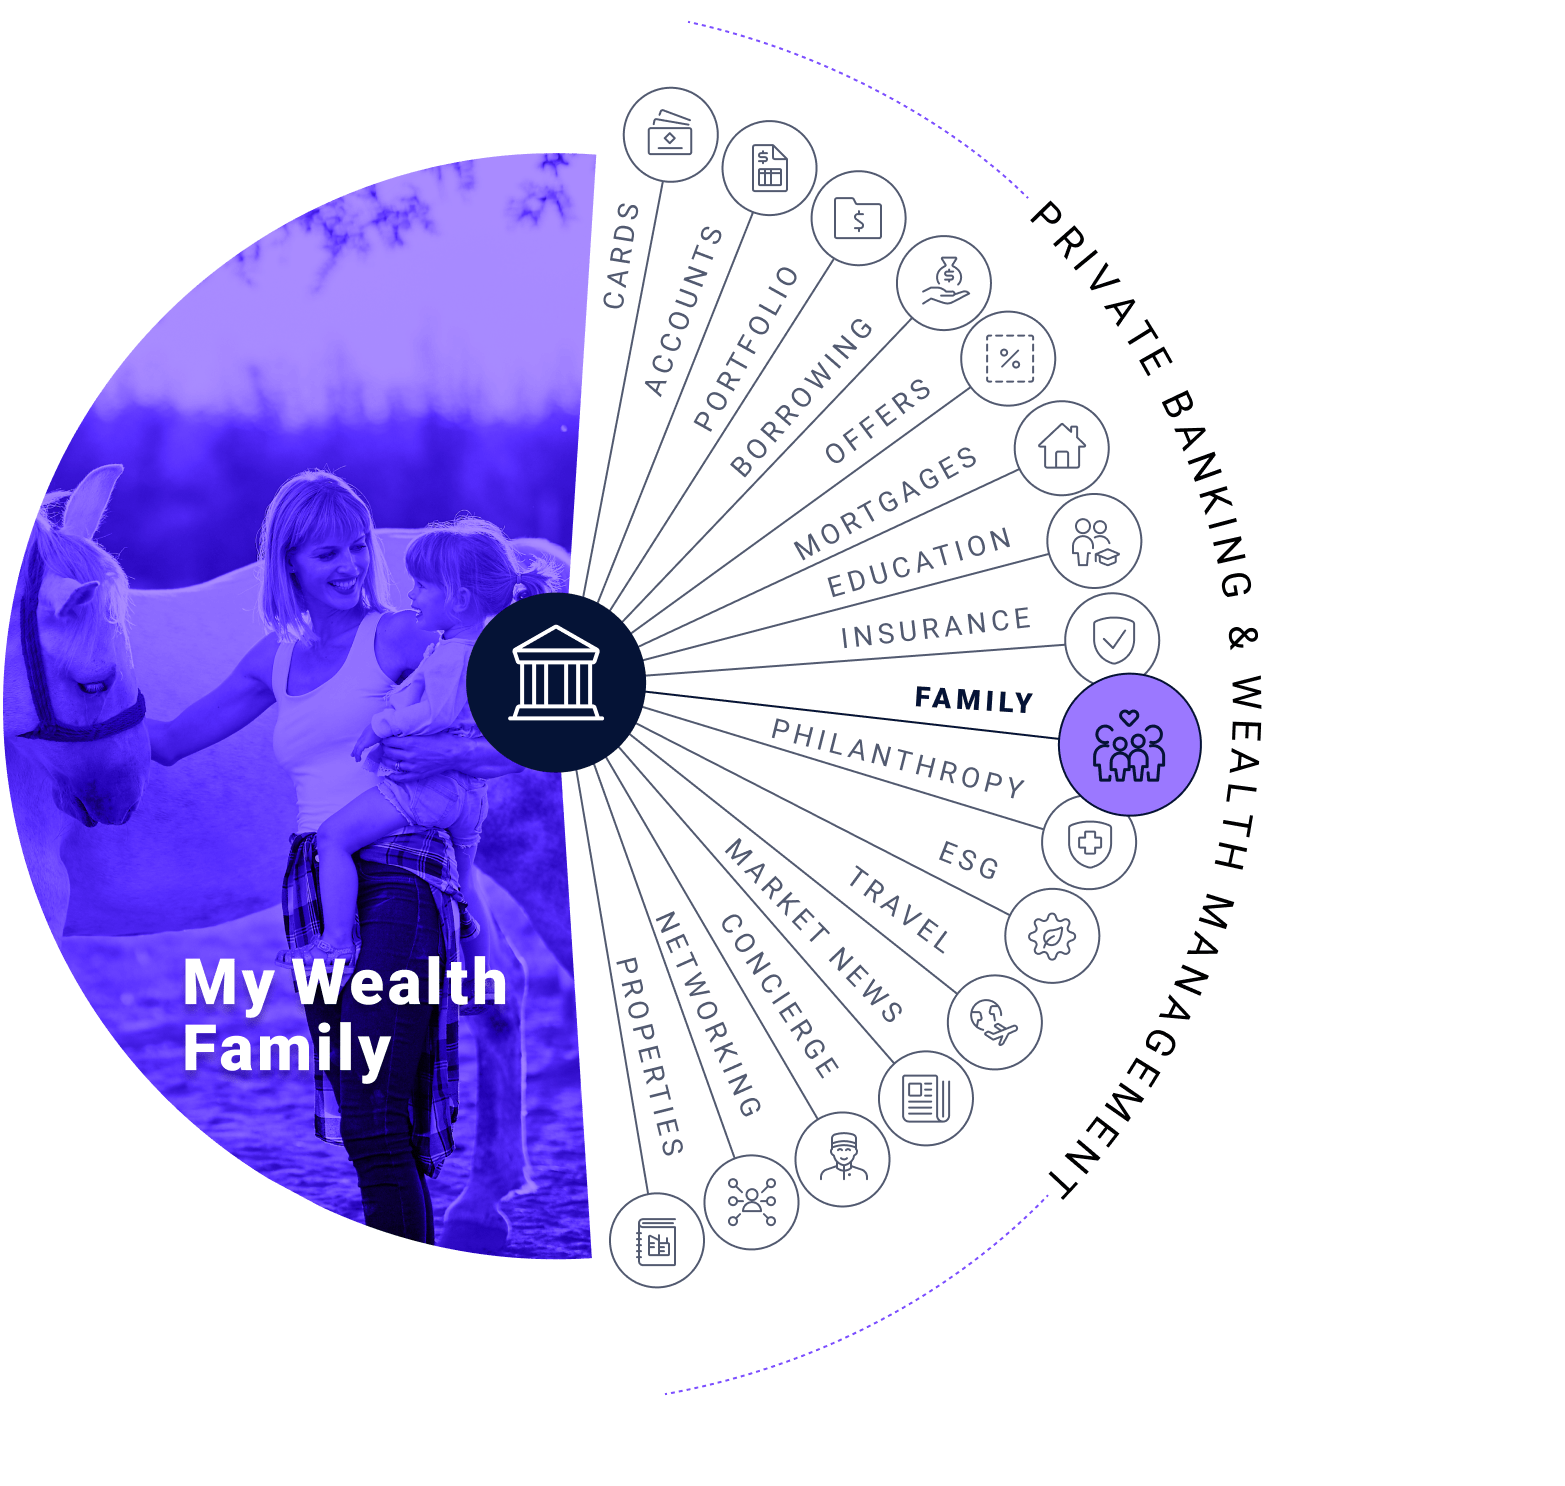 My Wealth family: cards, accounts, portfolio, borrowing, offers, mortgages, education, insurance, family, philanthropy, esg, travel, market news, concierge, networking, and properties